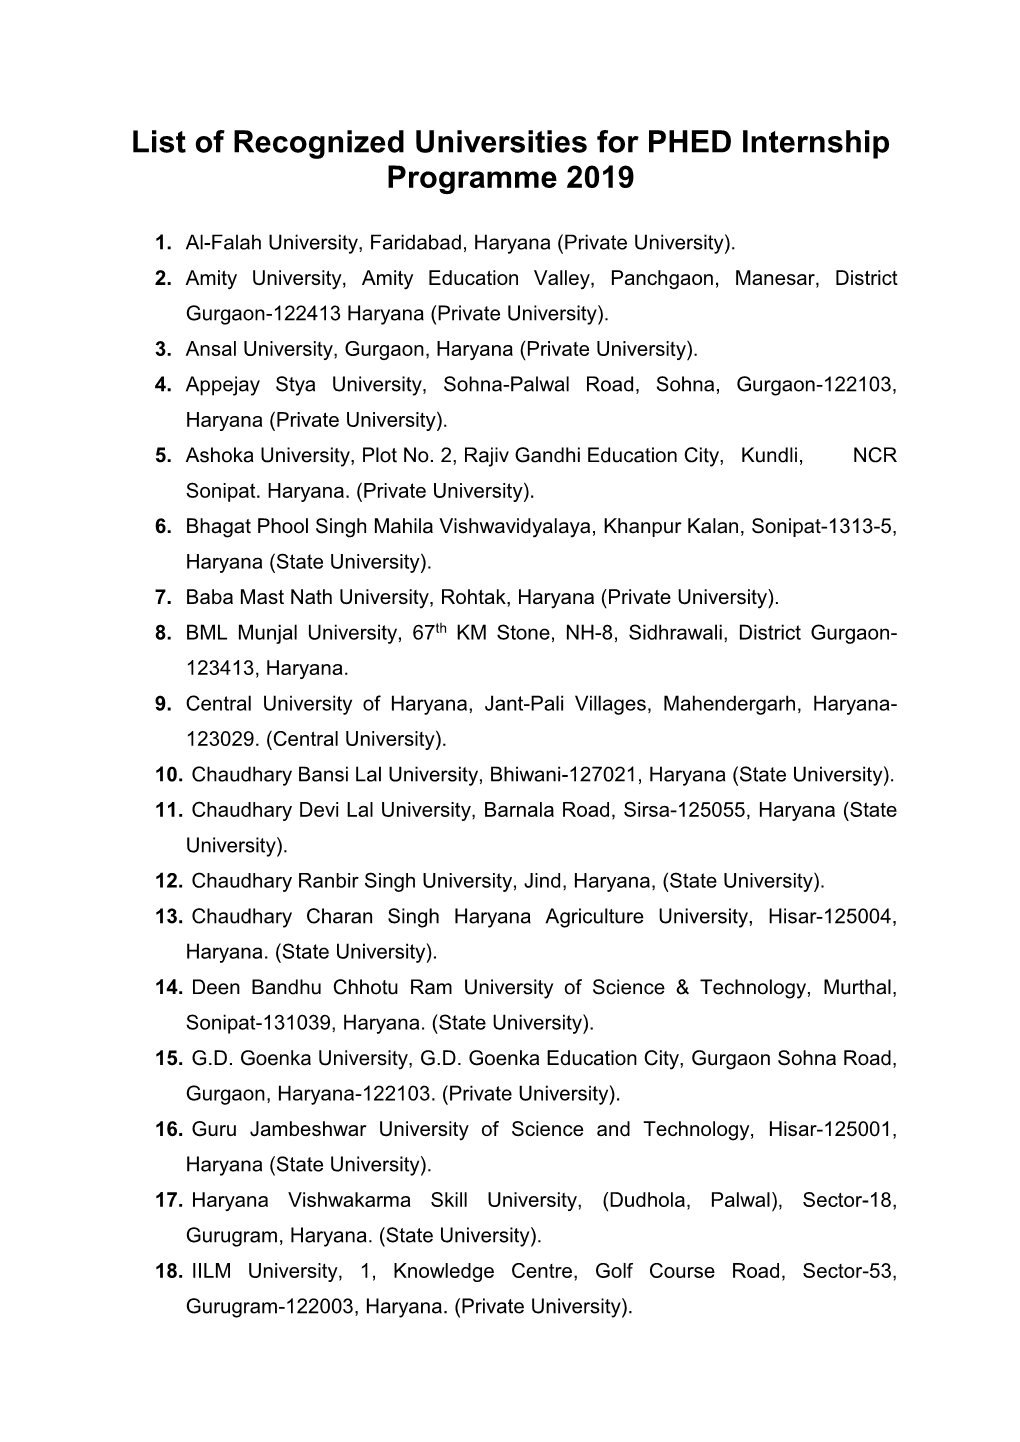 List of Recognized Universities for PHED Internship Programme 2019